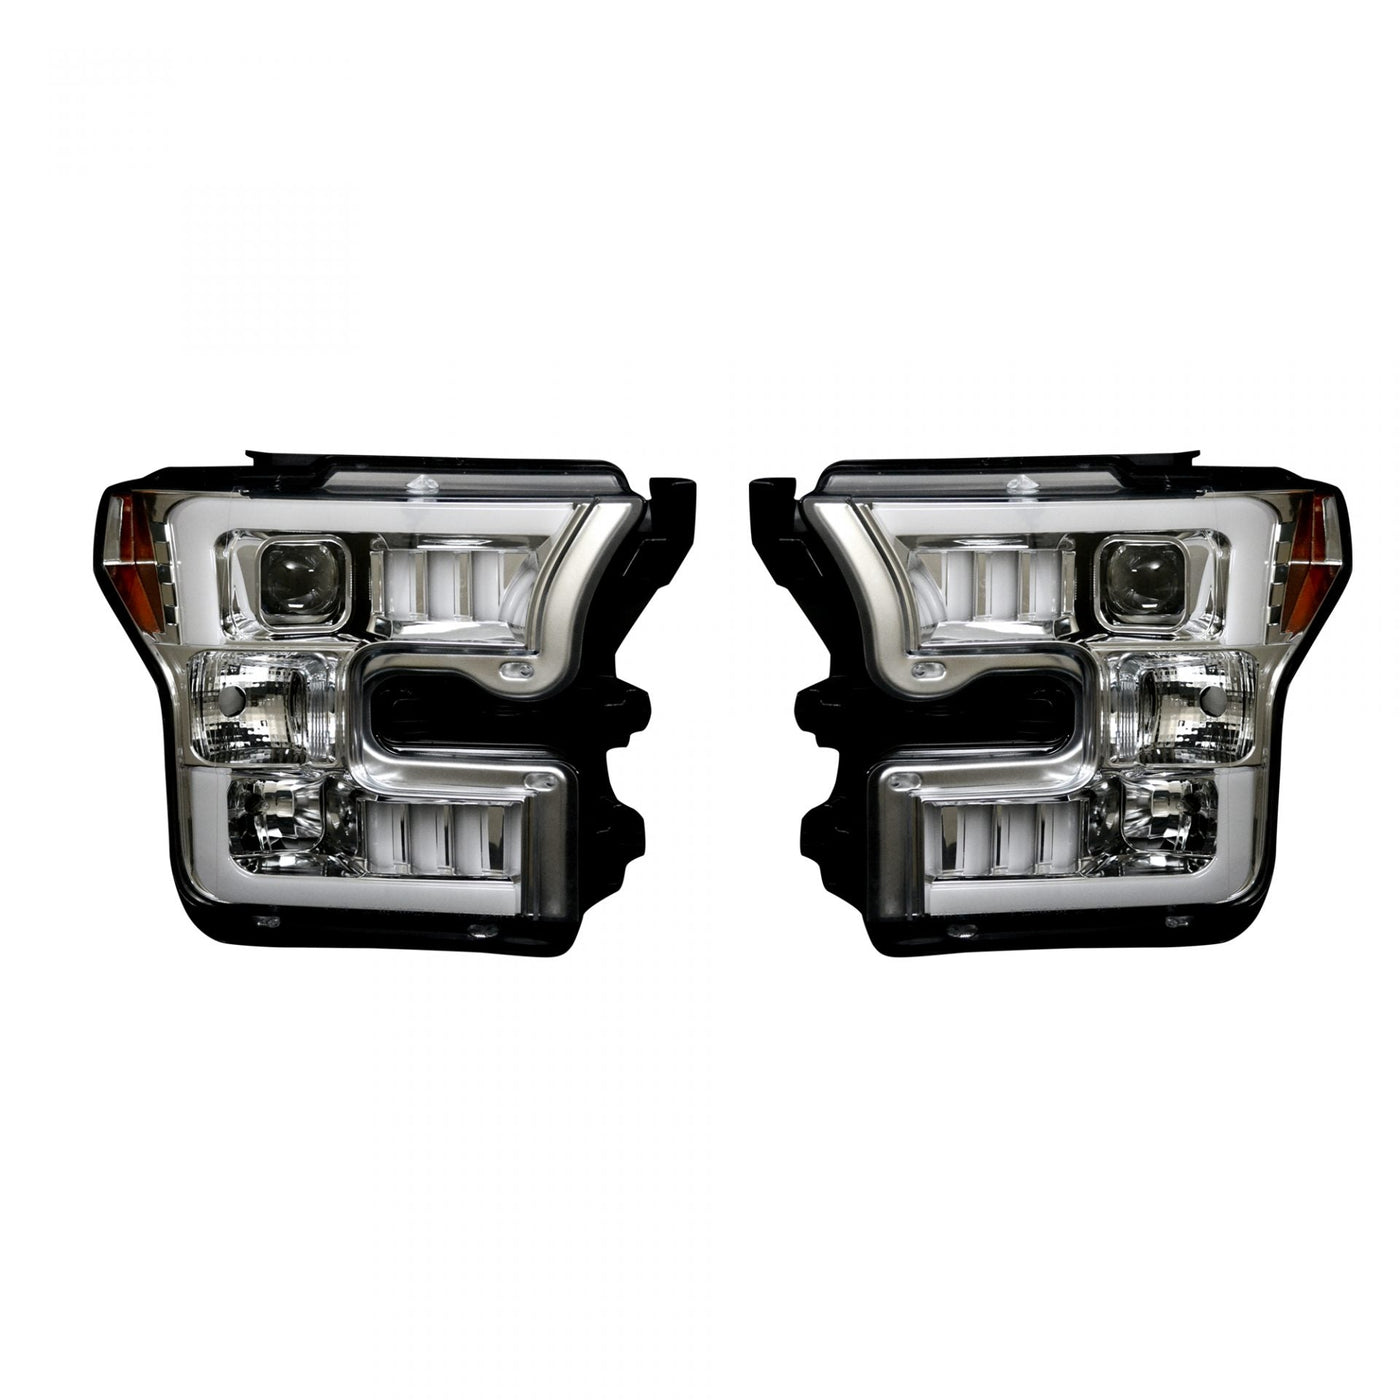 Ford Projector Headlights, F150 Projector Headlights, F150 15-17 Projector Headlights, Clear/Chrome Headlights, LED Projector Headlights